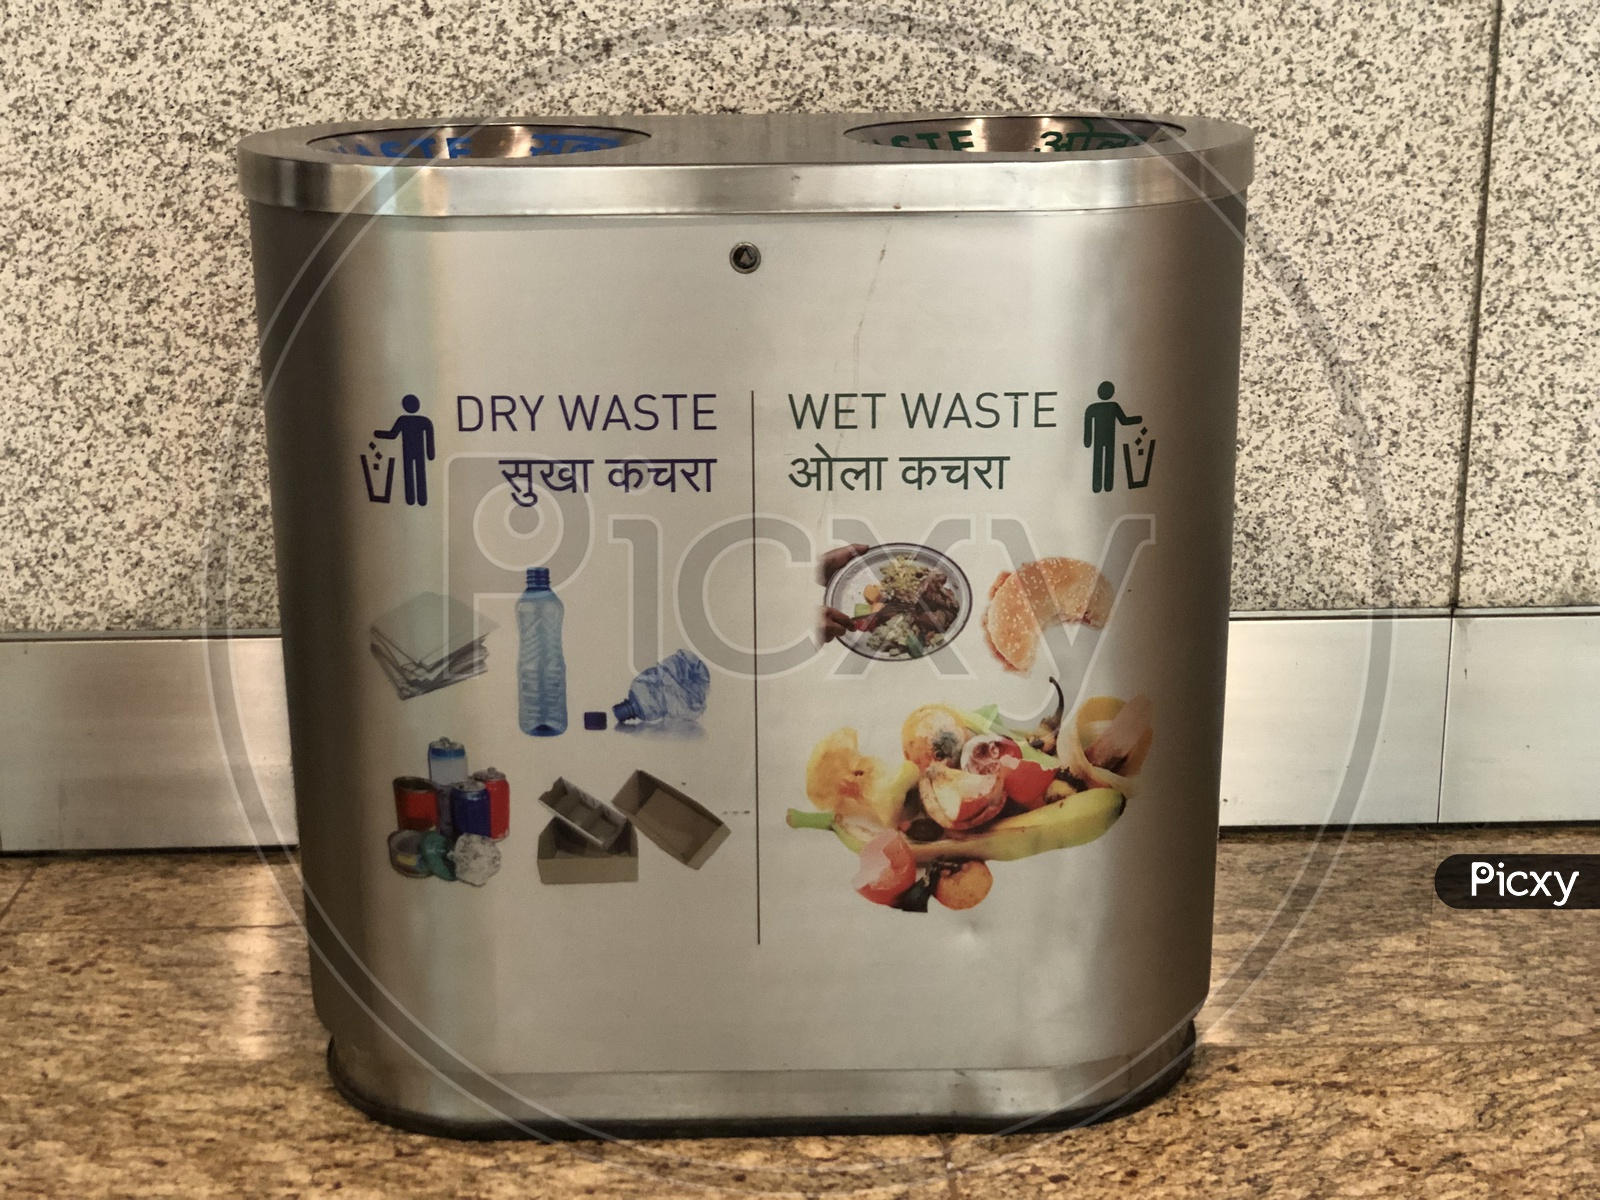 Dry Waste And Wet Waste Dustbin At an Airport